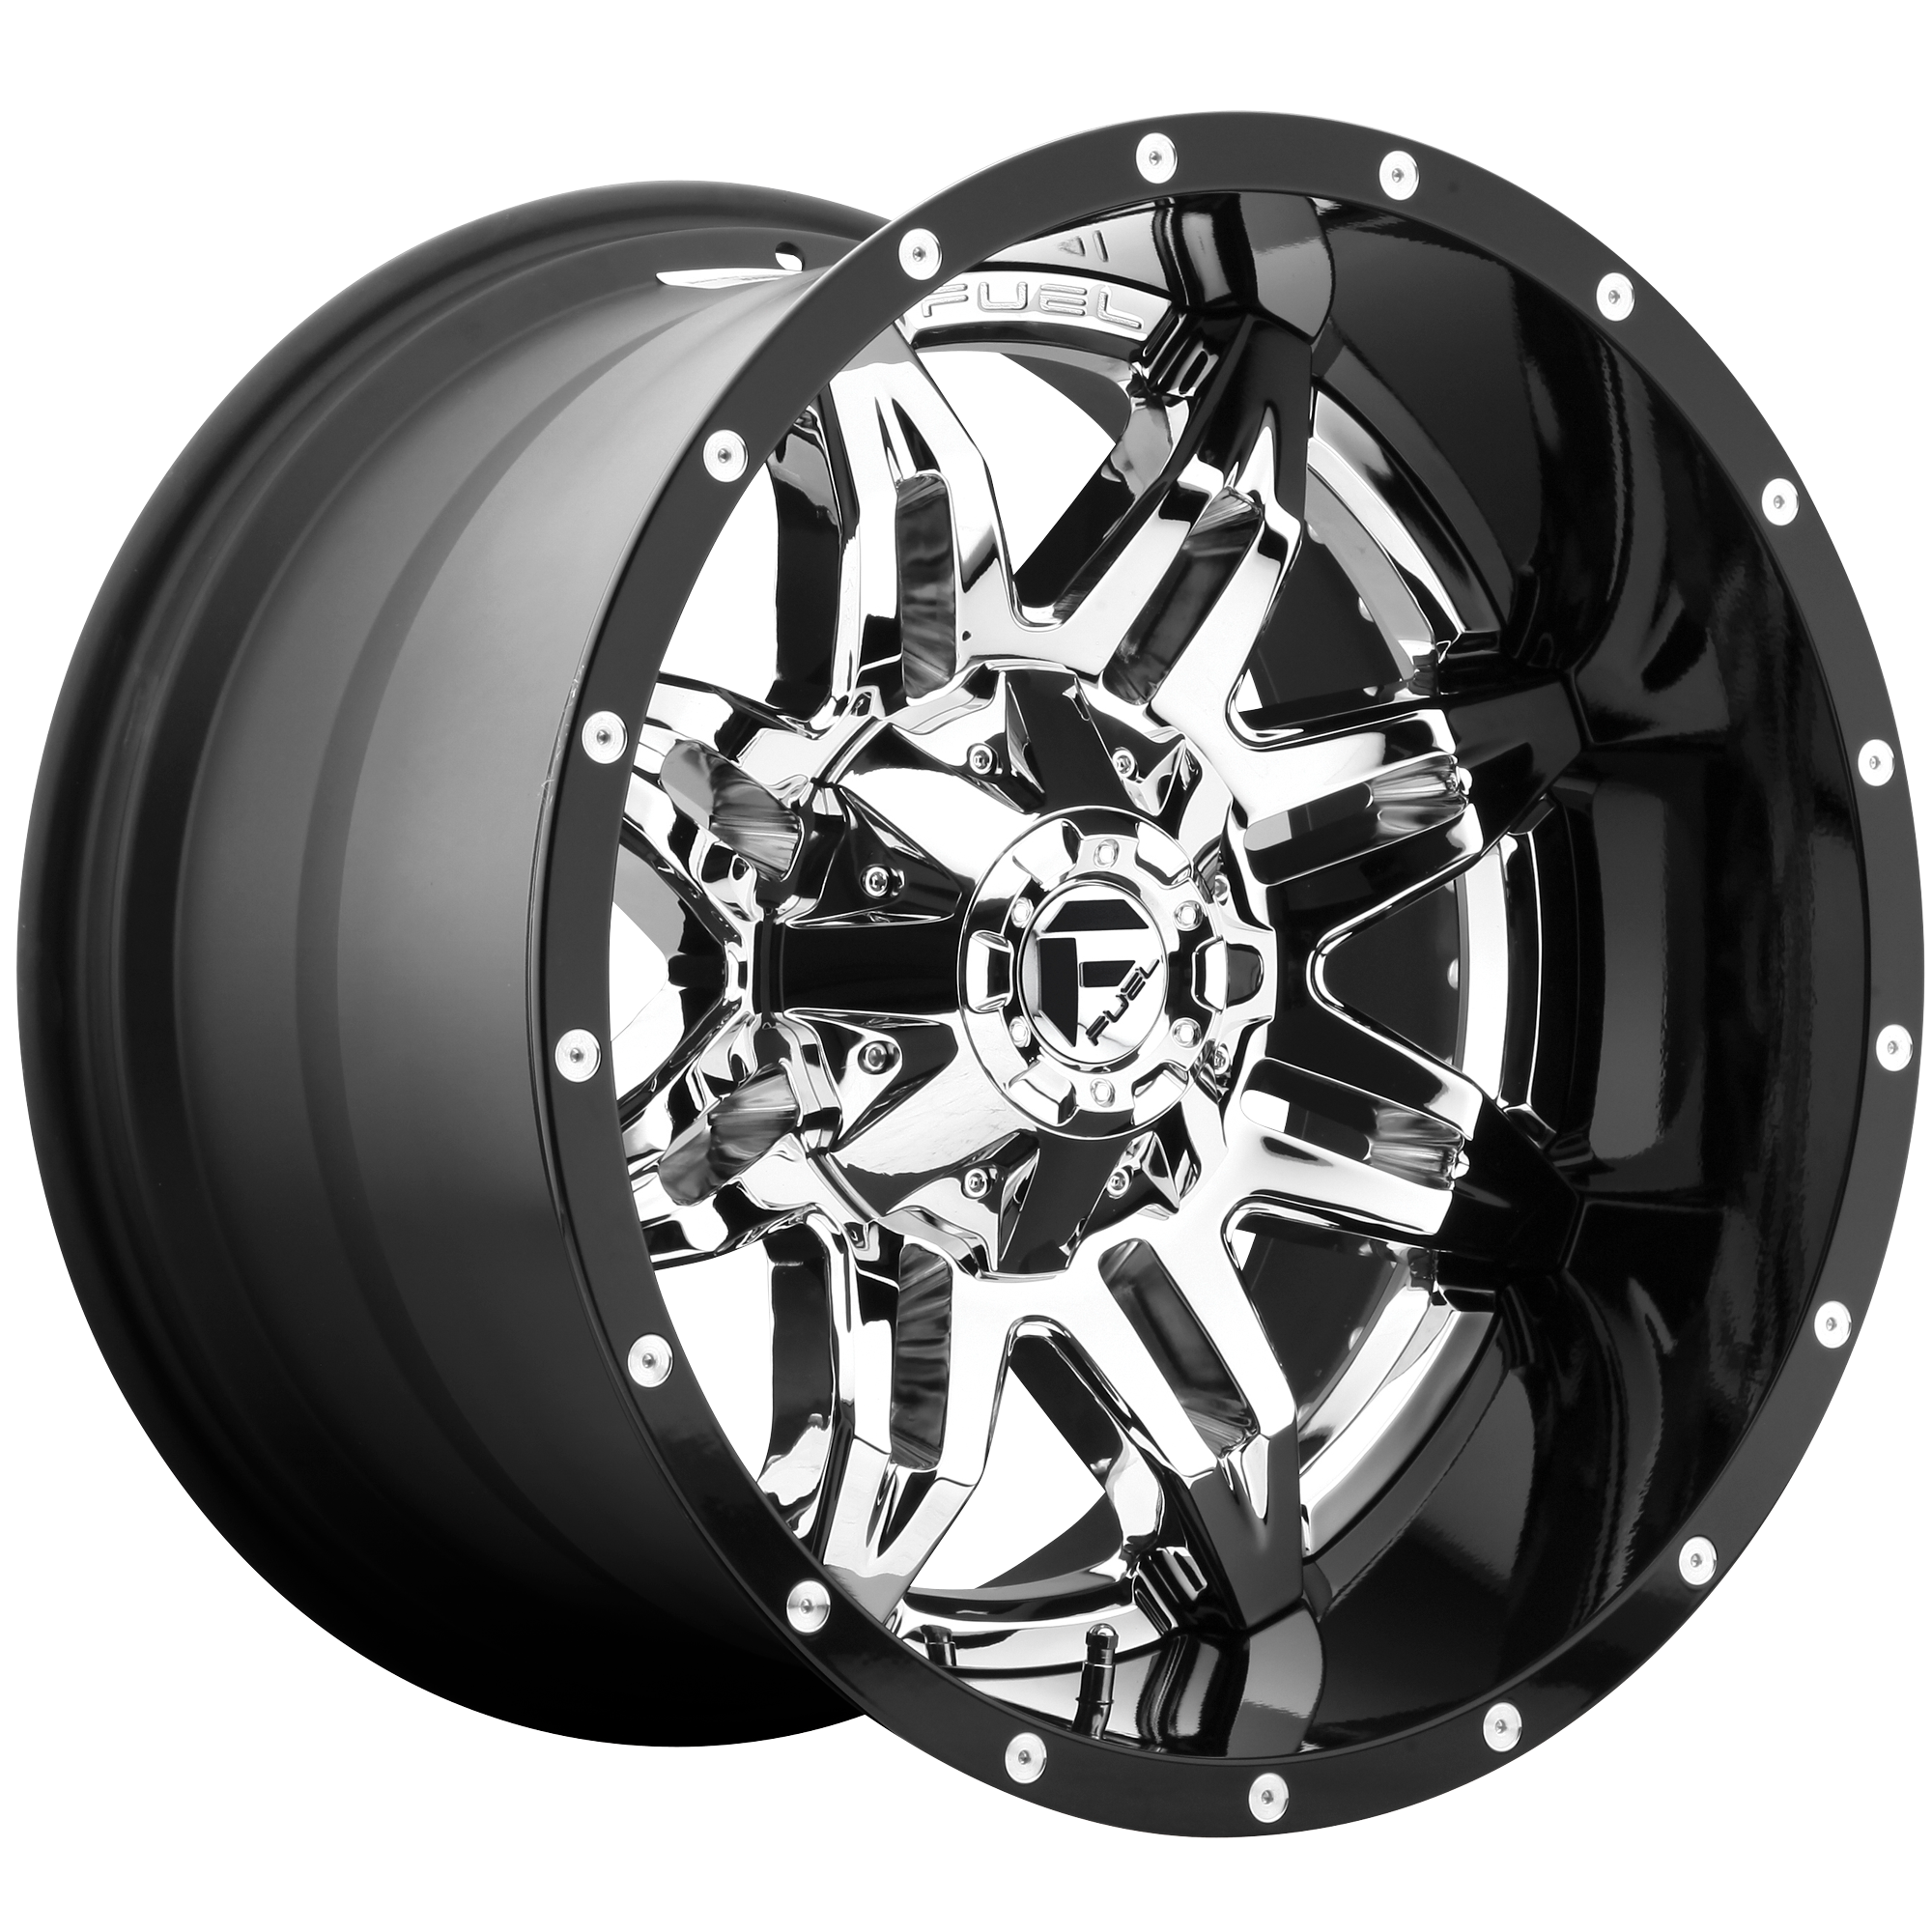 LETHAL 20x10 5x114.30/5x127.00 CHROME PLATED GLOSS BLACK LIP (-19 mm) - Tires and Engine Performance